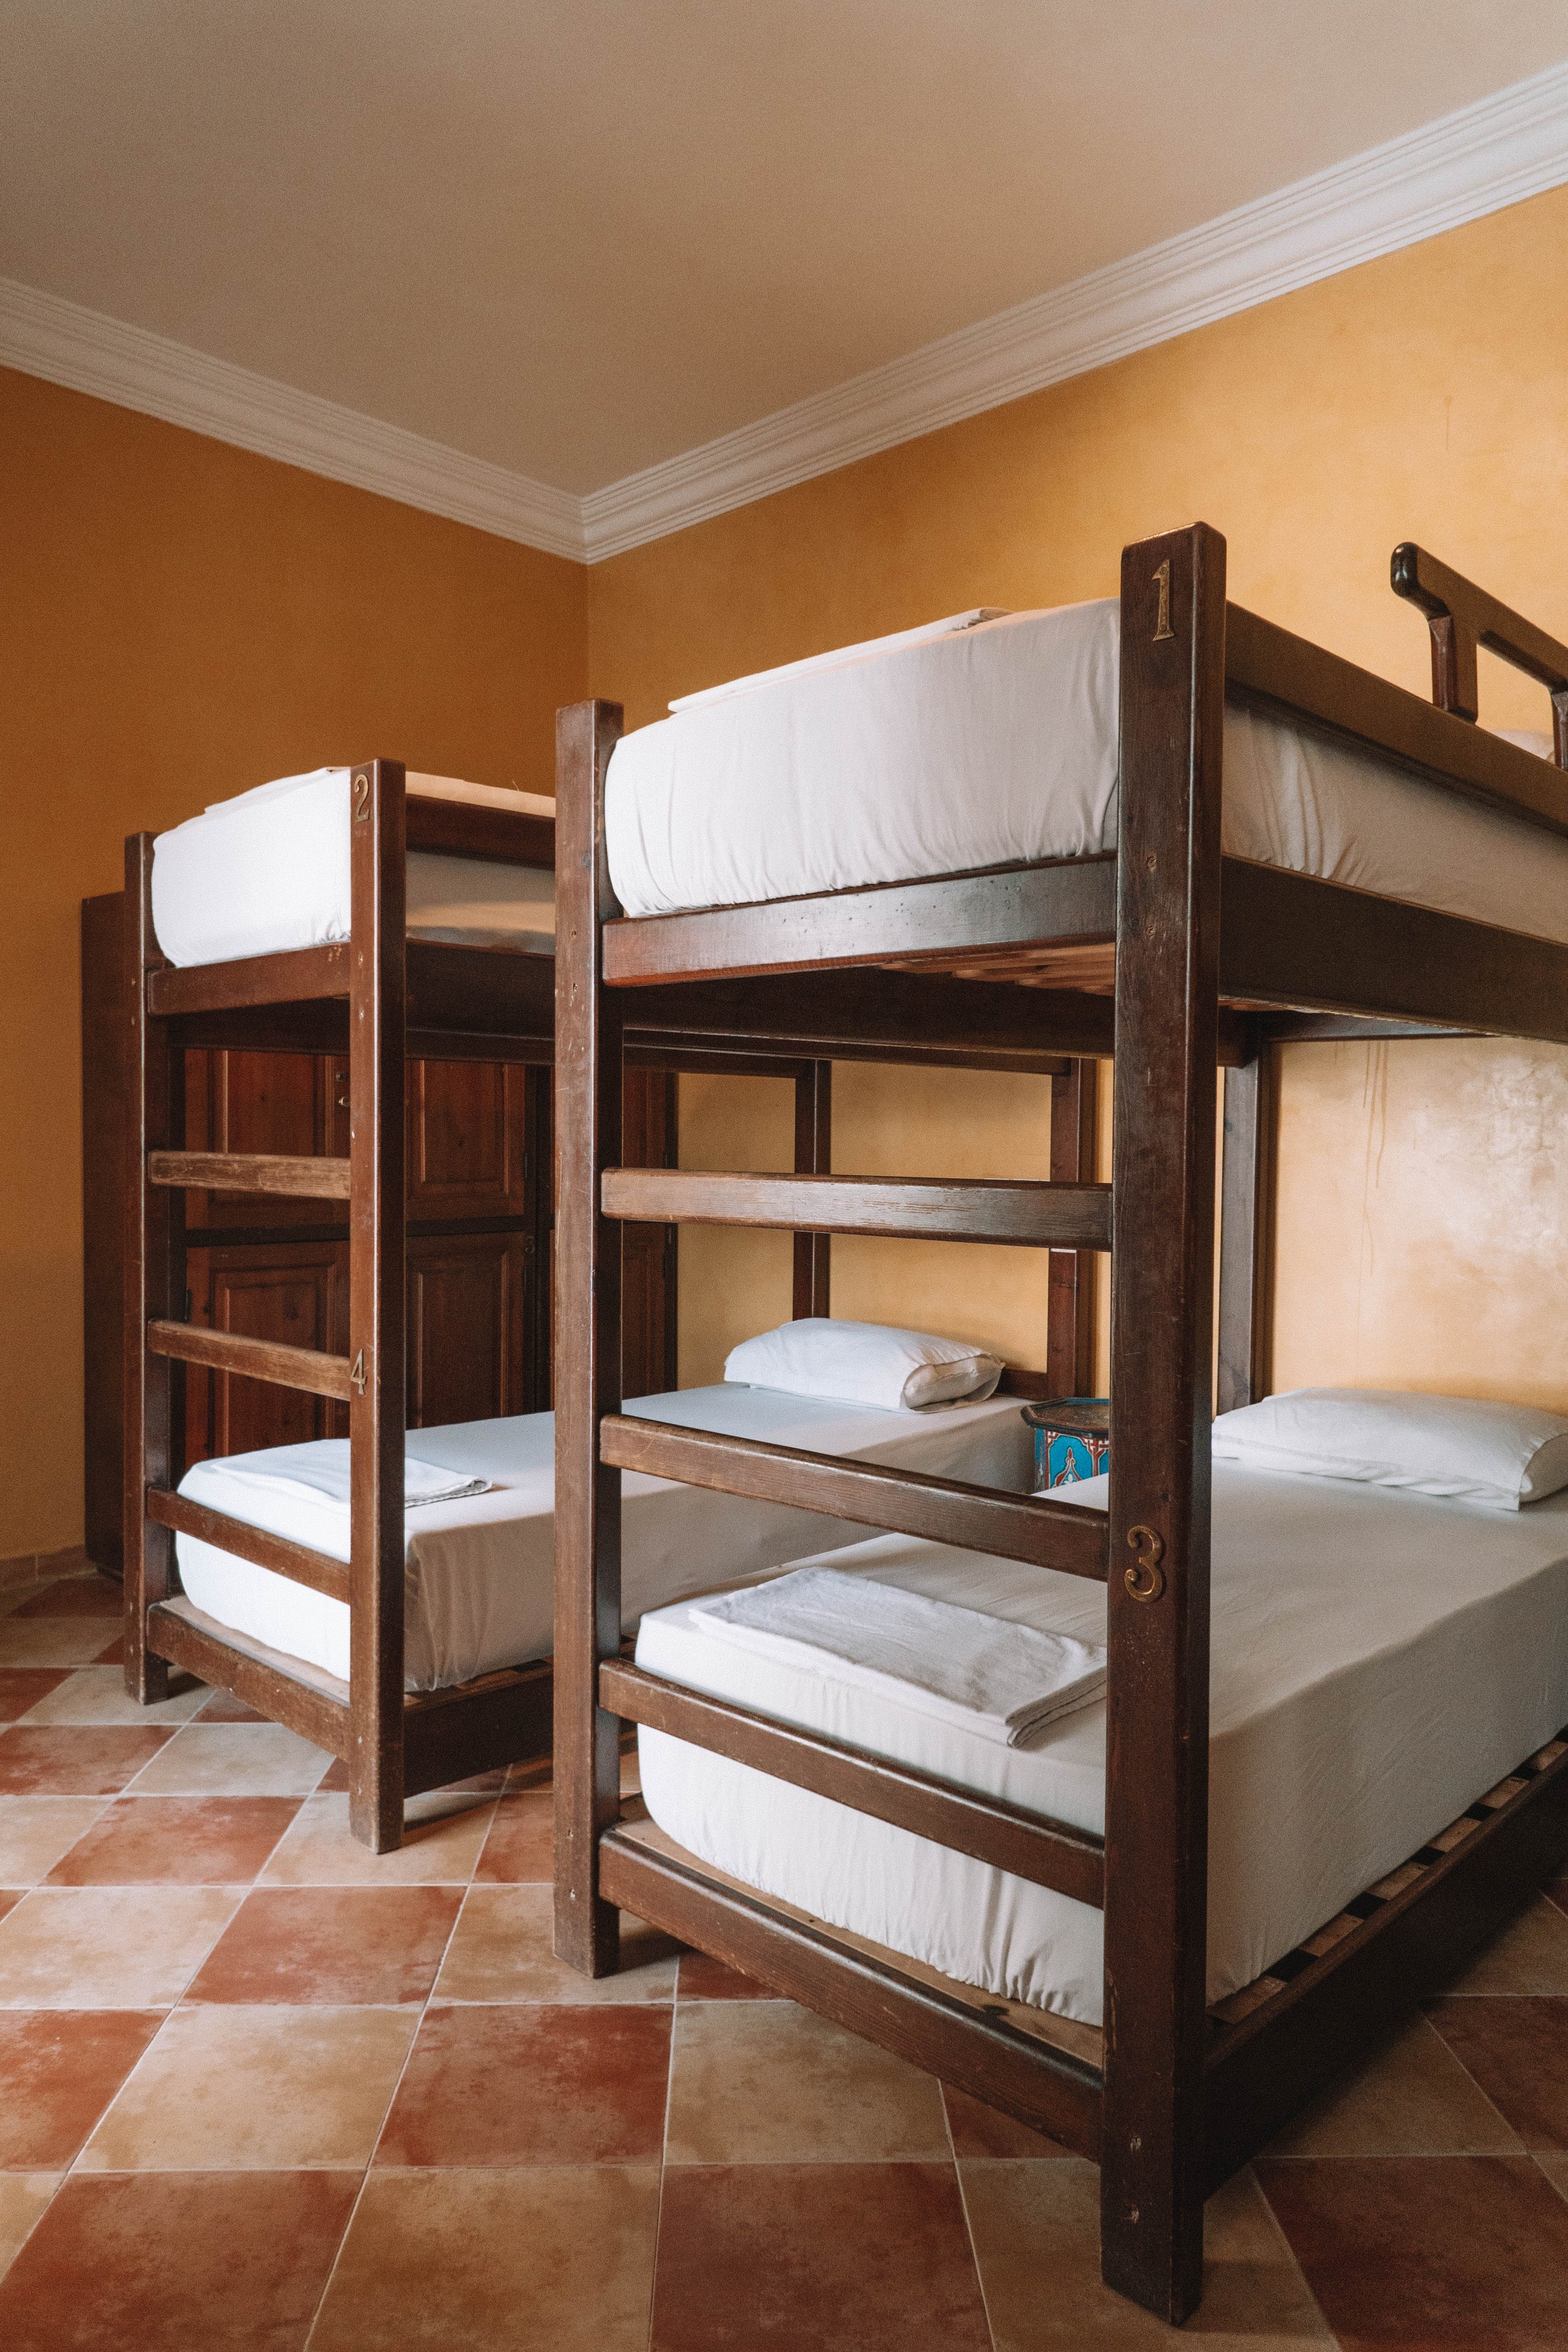 Equity Point Marrakech | Bed in 6-Bed Dormitory Room | 1.jpg